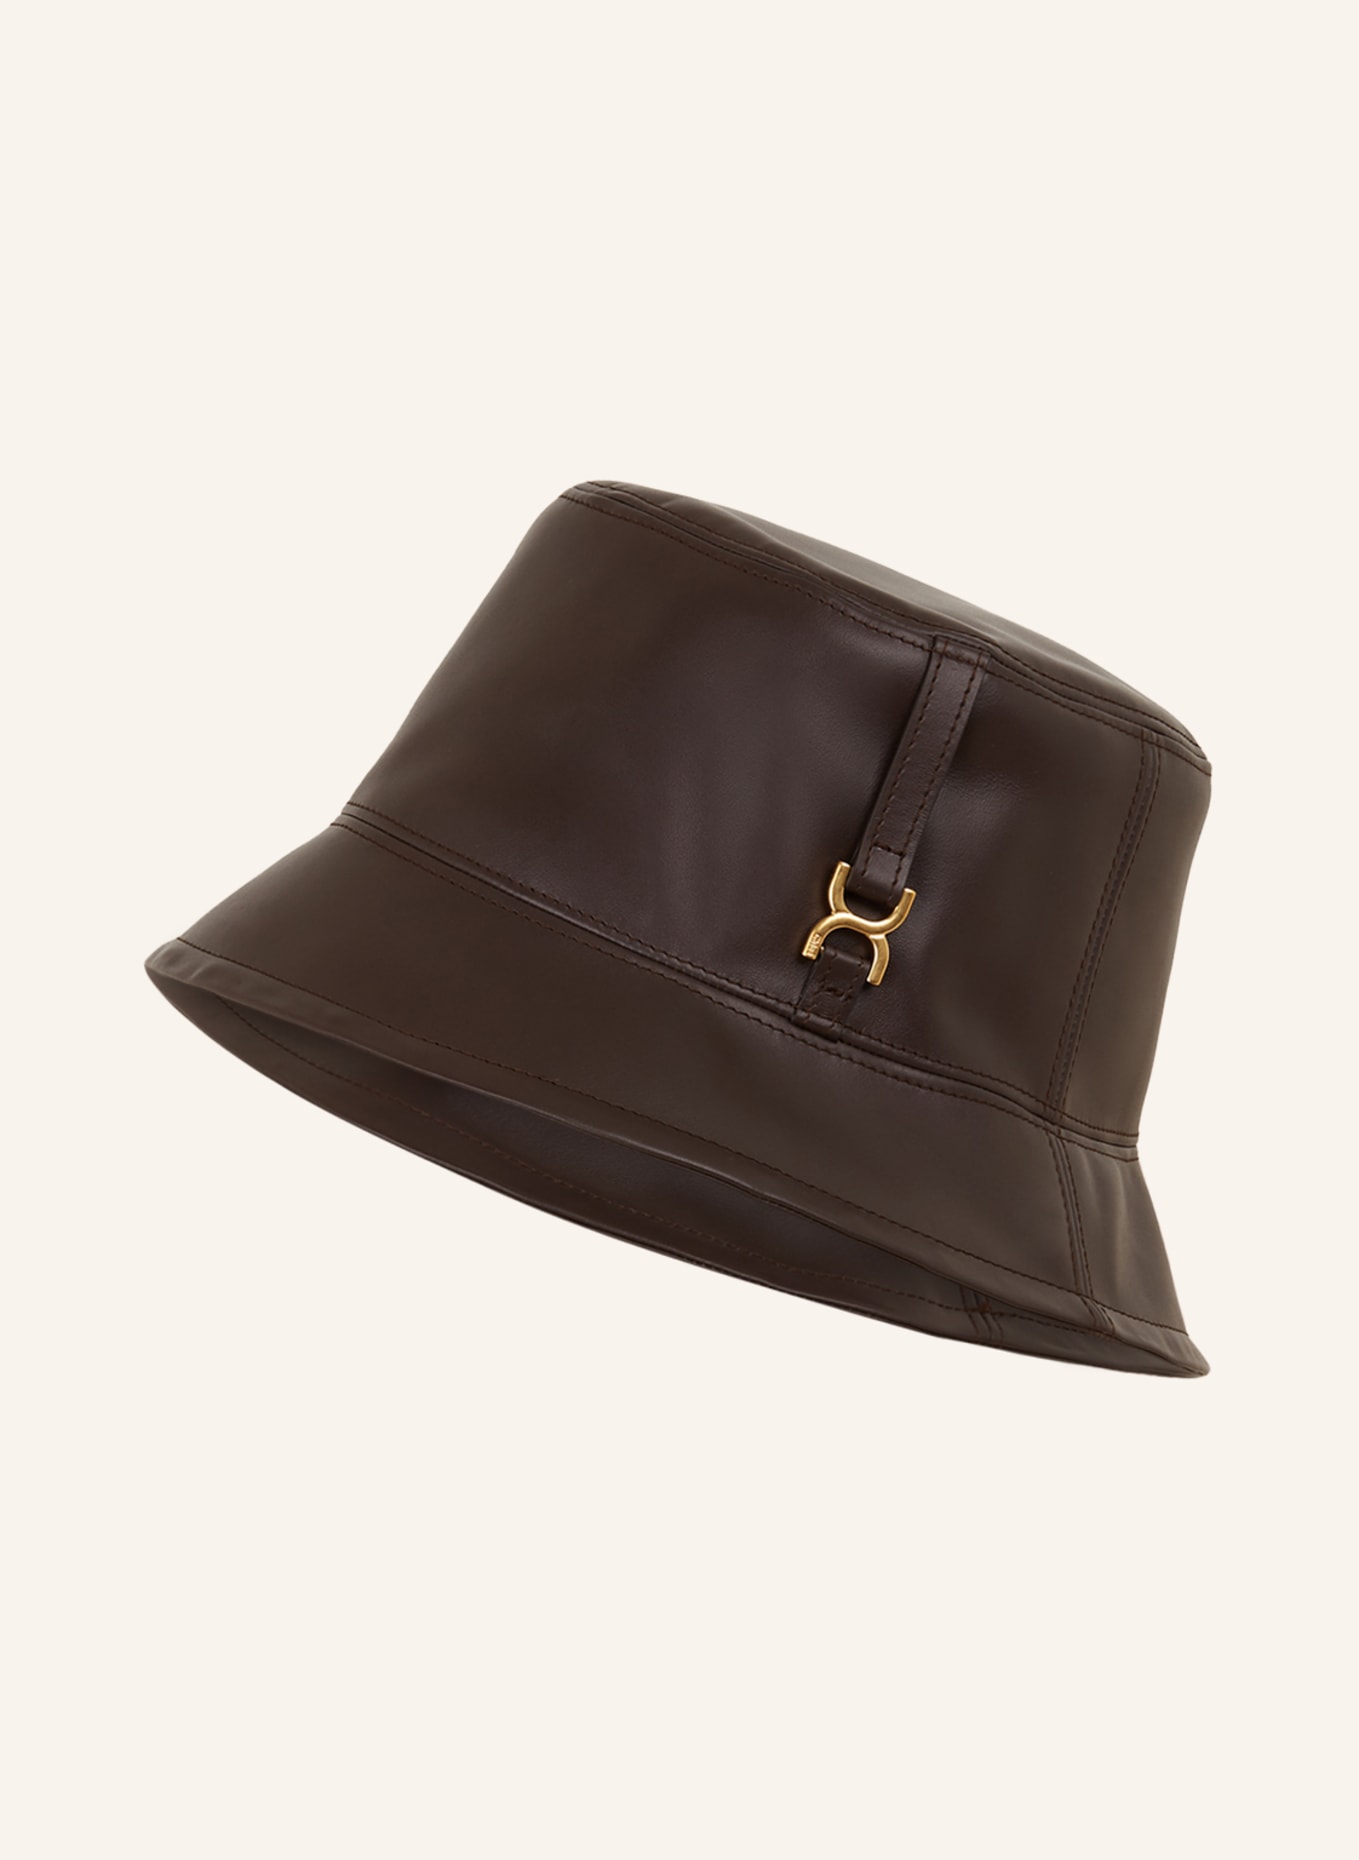 Chloé Bucket hat MARCIE made of leather, Color: Darkened Brown (Image 1)